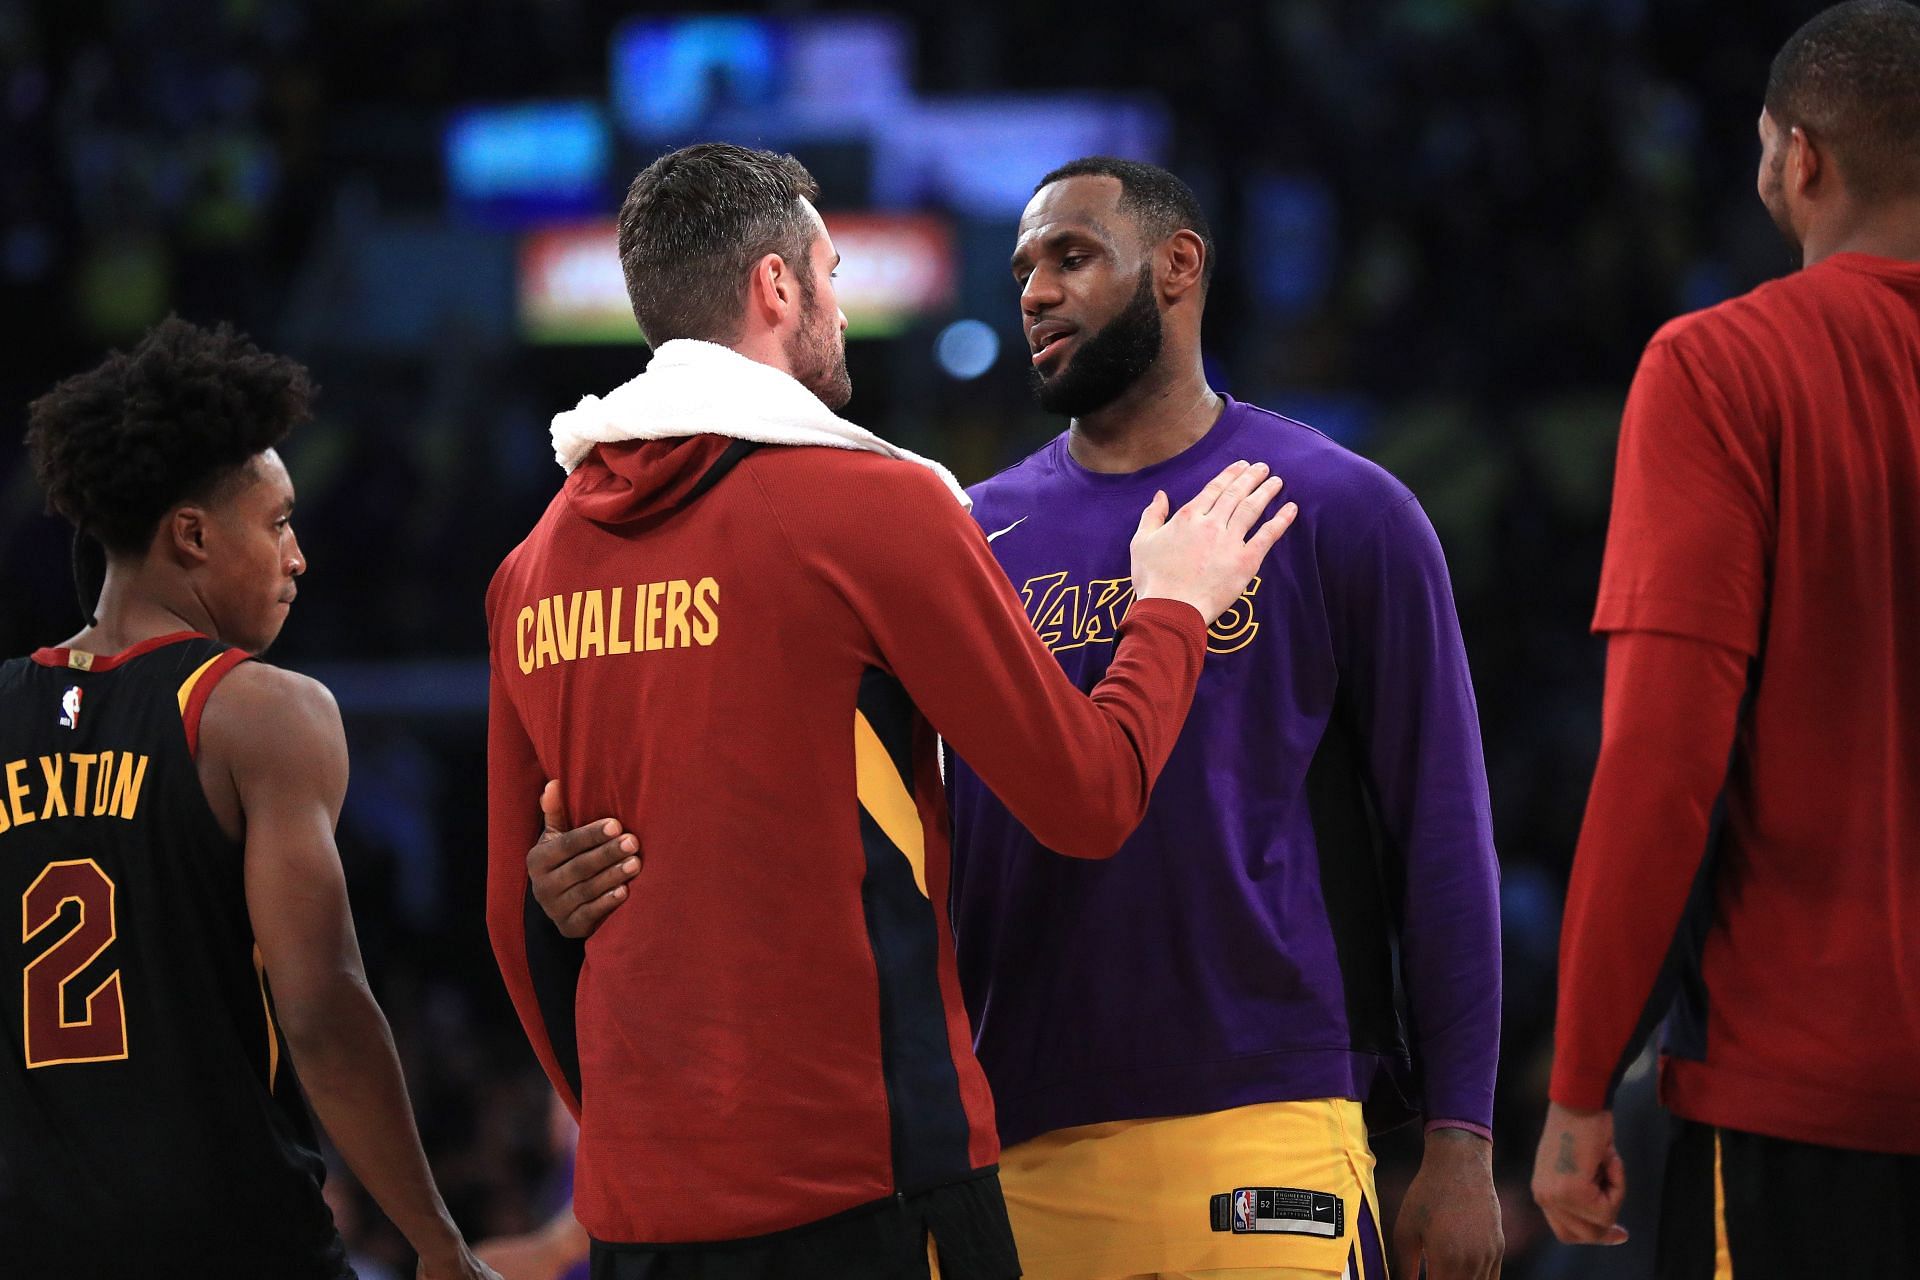 LA Lakers superstar LeBron James has recently been linked with a return to the Cleveland Cavaliers